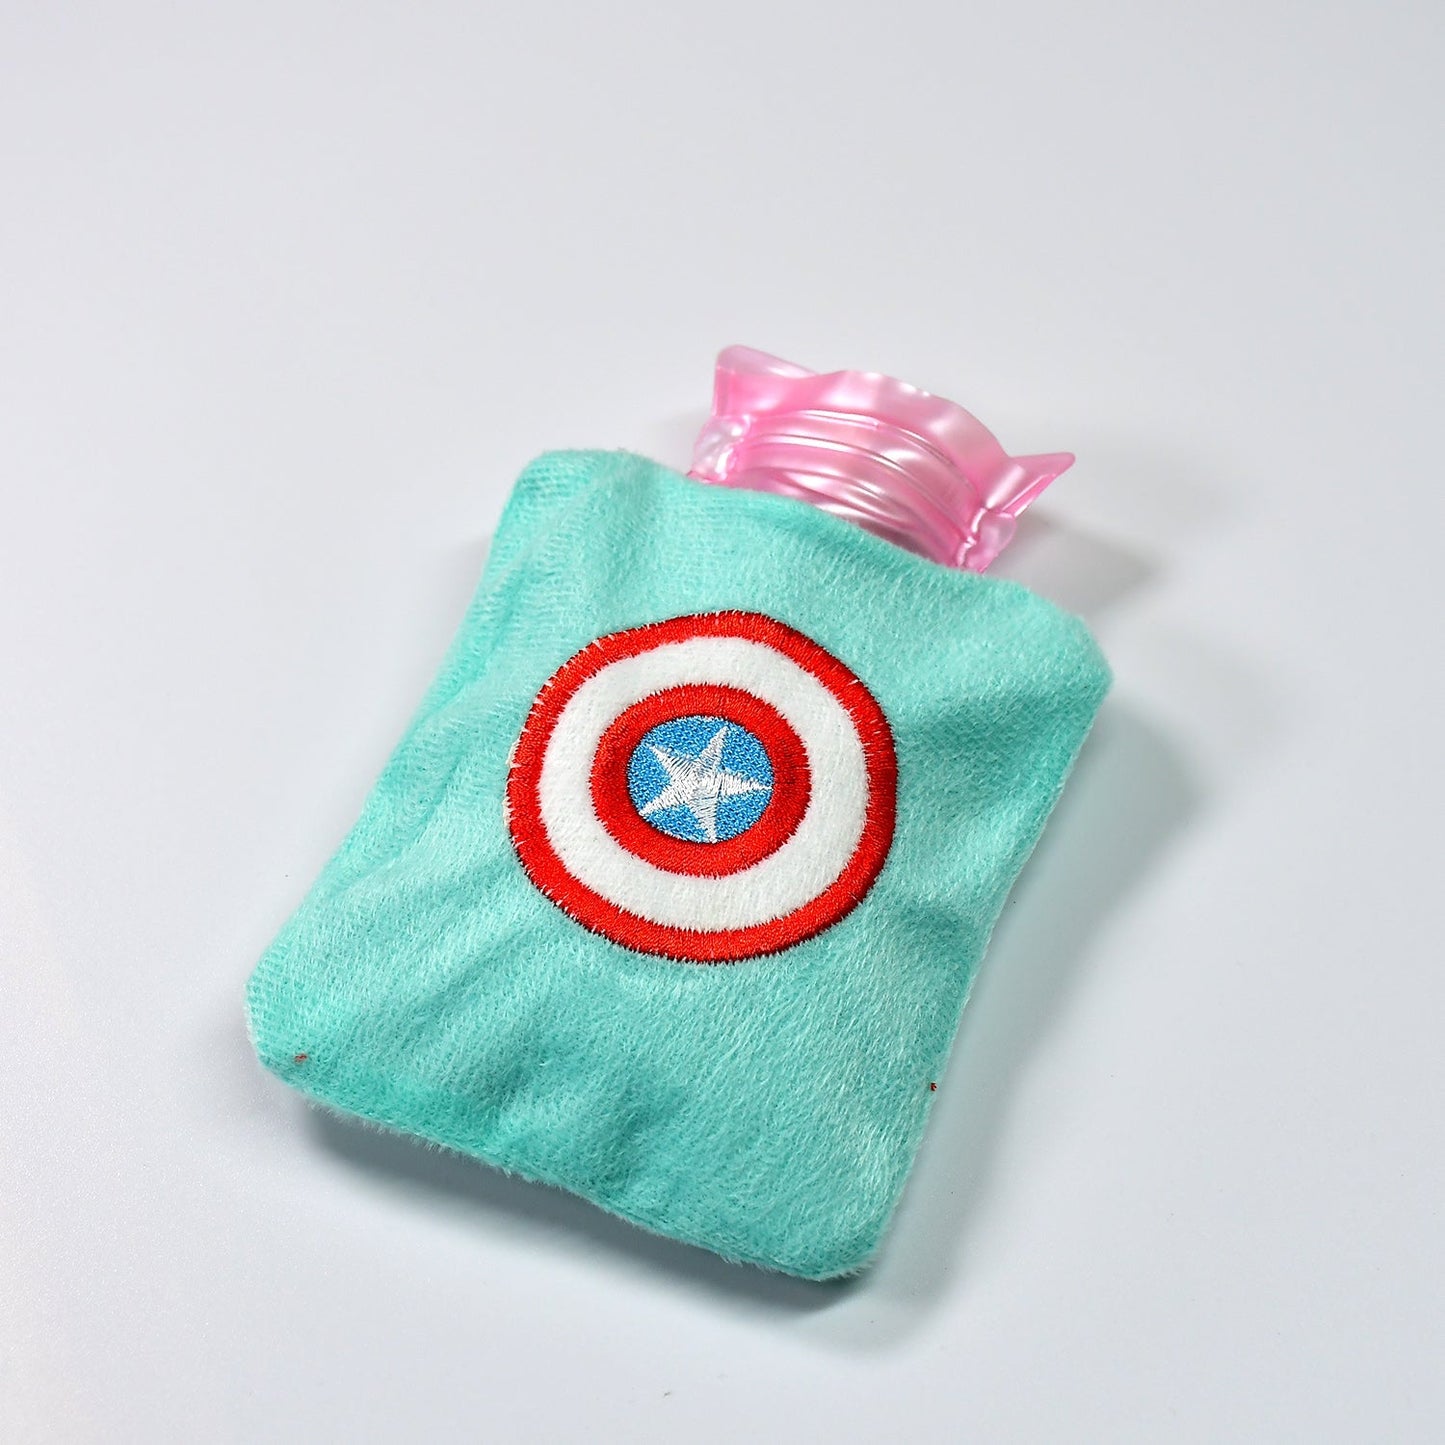 6517 Captain America's Shield small Hot Water Bag with Cover for Pain Relief, Neck, Shoulder Pain and Hand, Feet Warmer, Menstrual Cramps. DeoDap